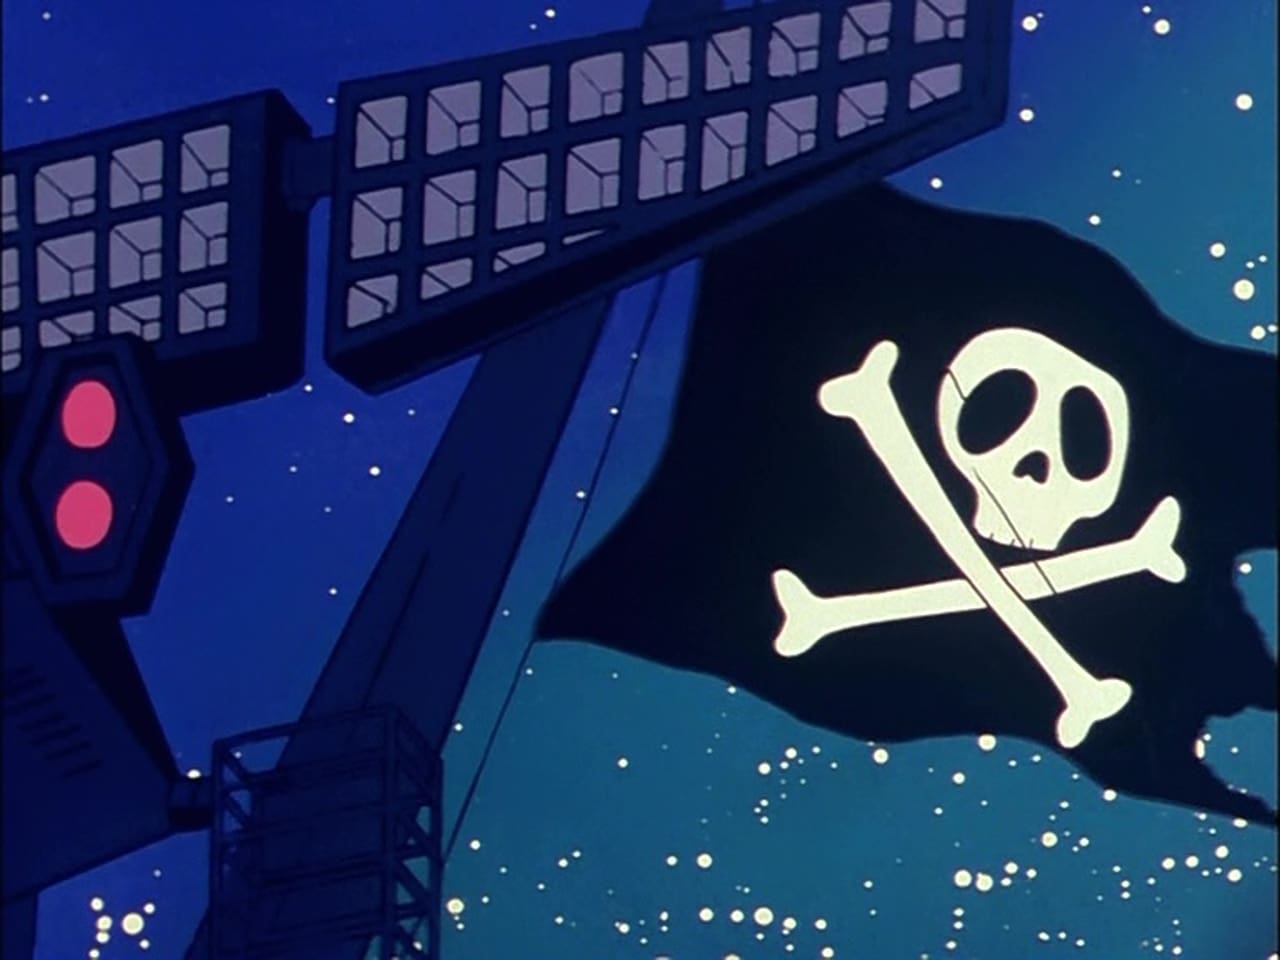 The Jolly Roger of Space